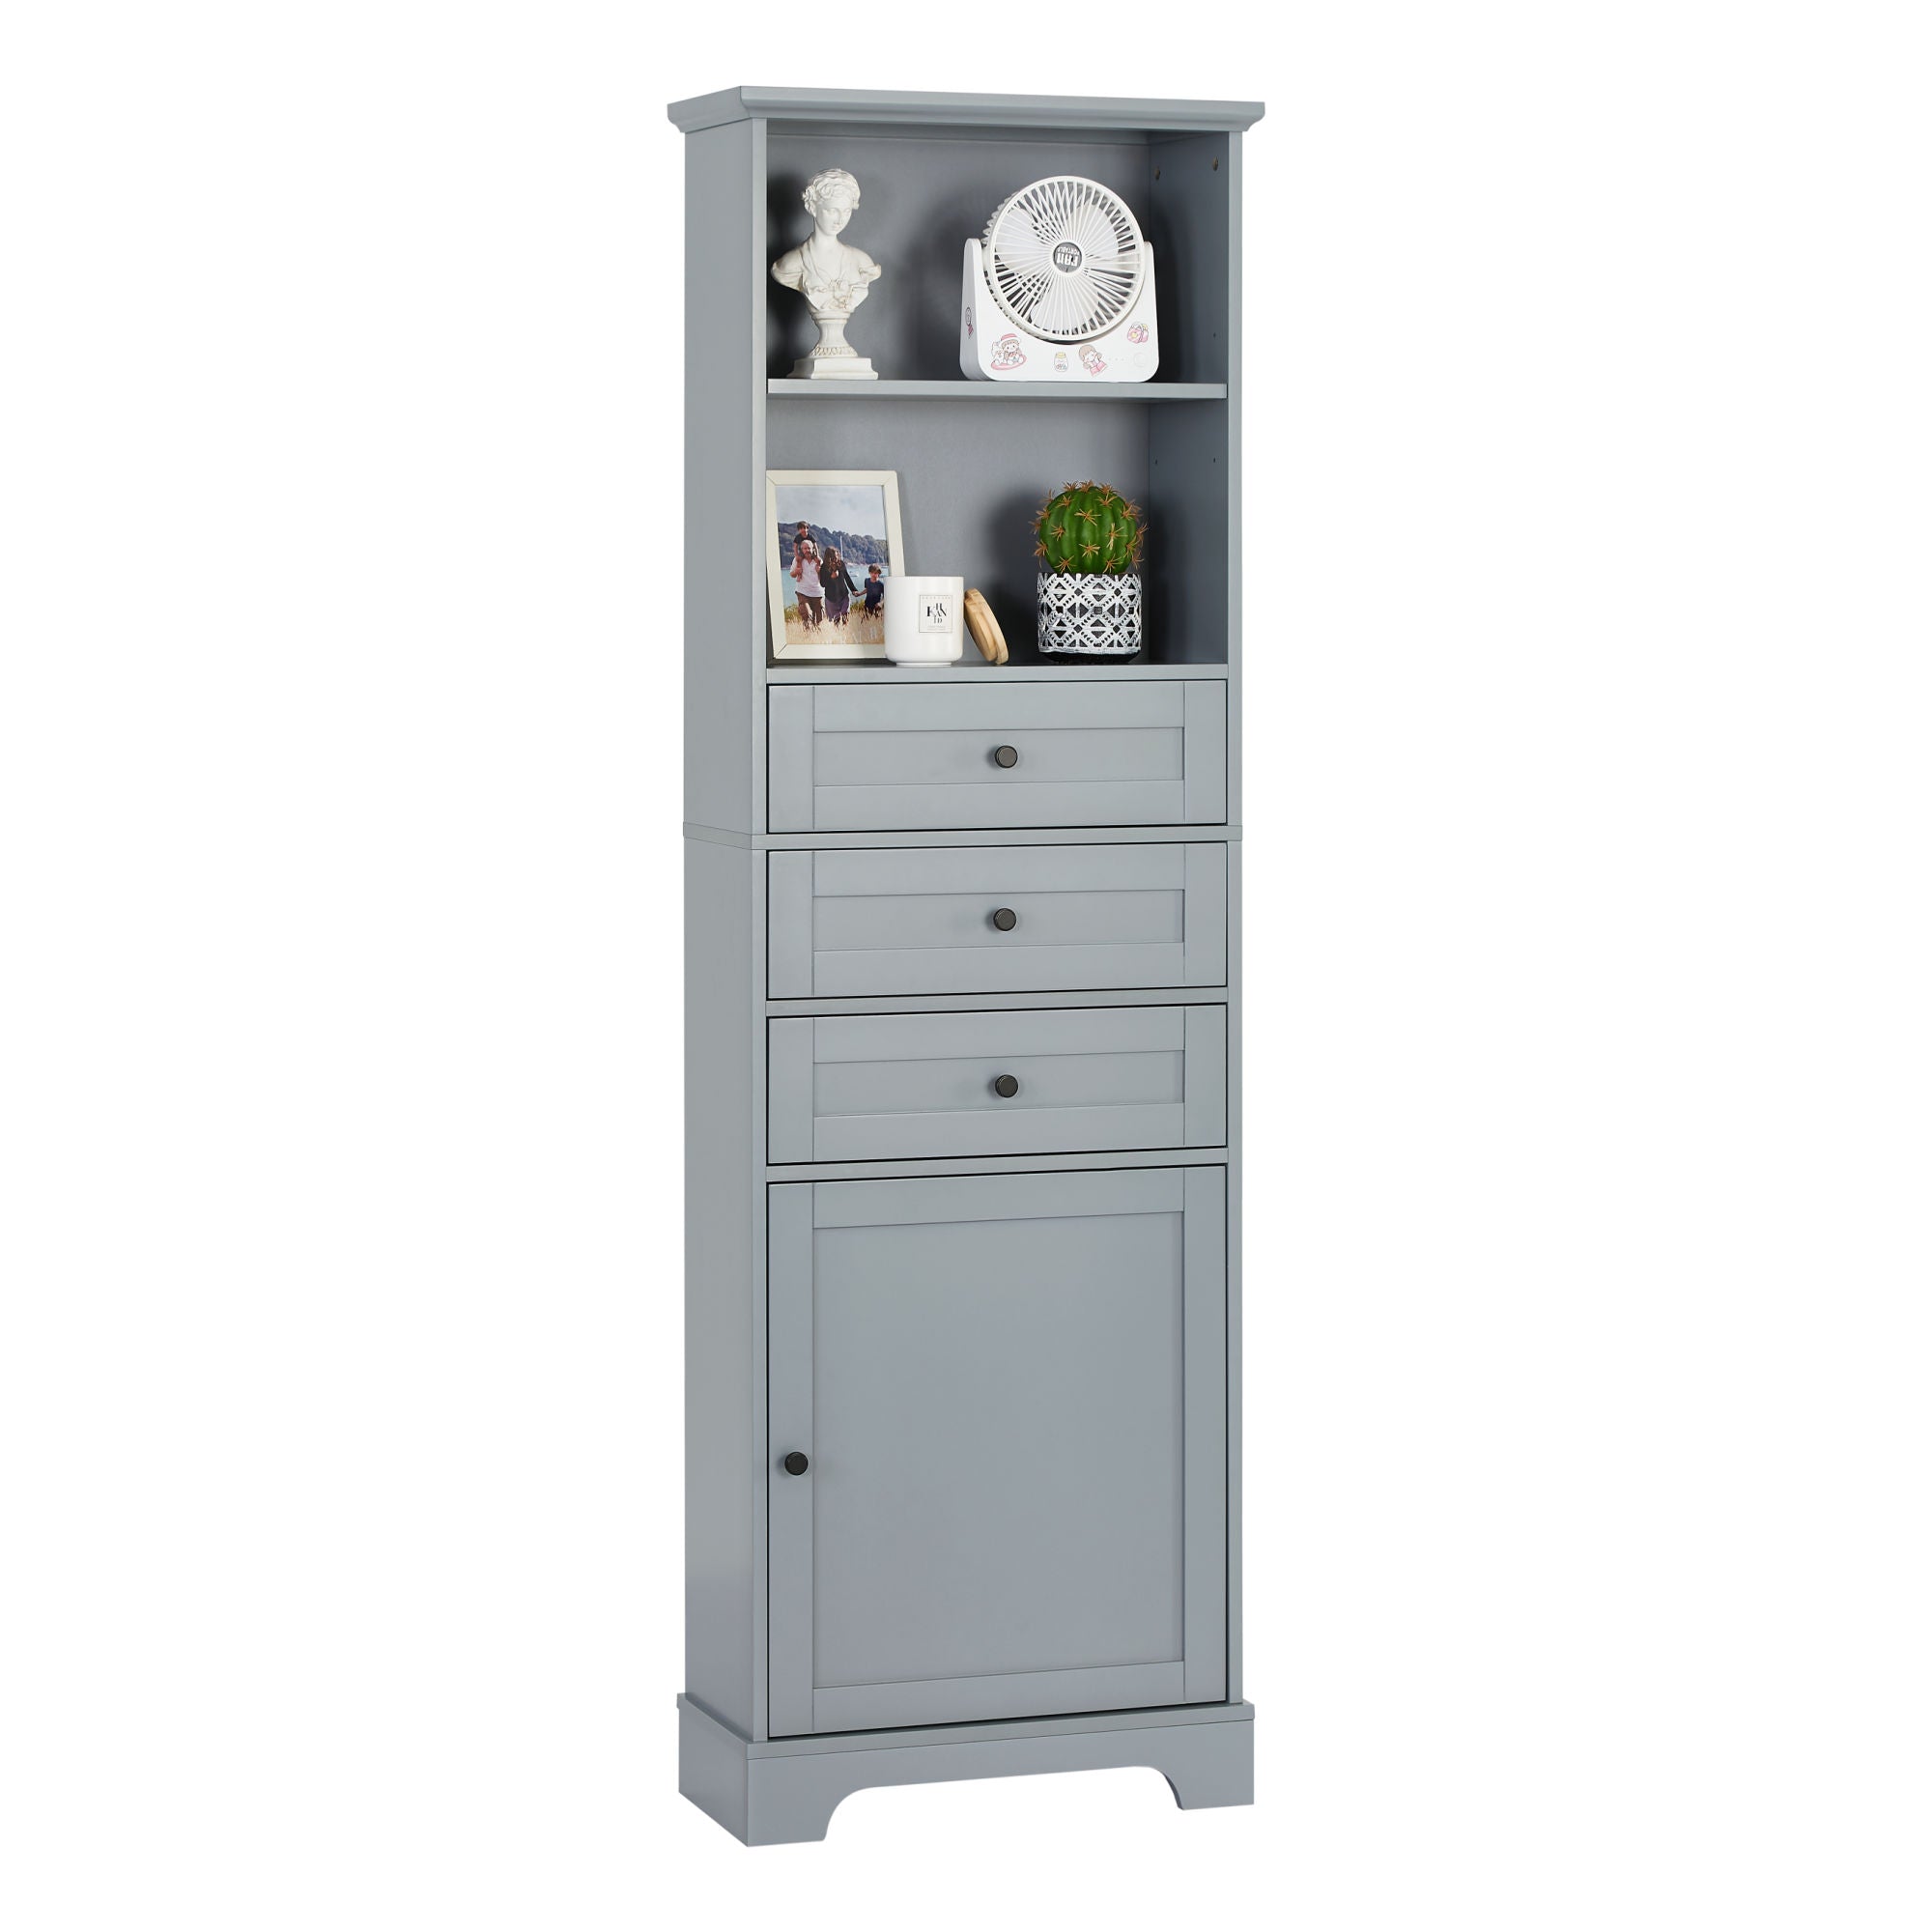 A bathroom with a Tall Storage Cabinet with 3 Drawers and Adjustable Shelves for Bathroom; Kitchen and Living Room; MDF Board with Painted Finish.